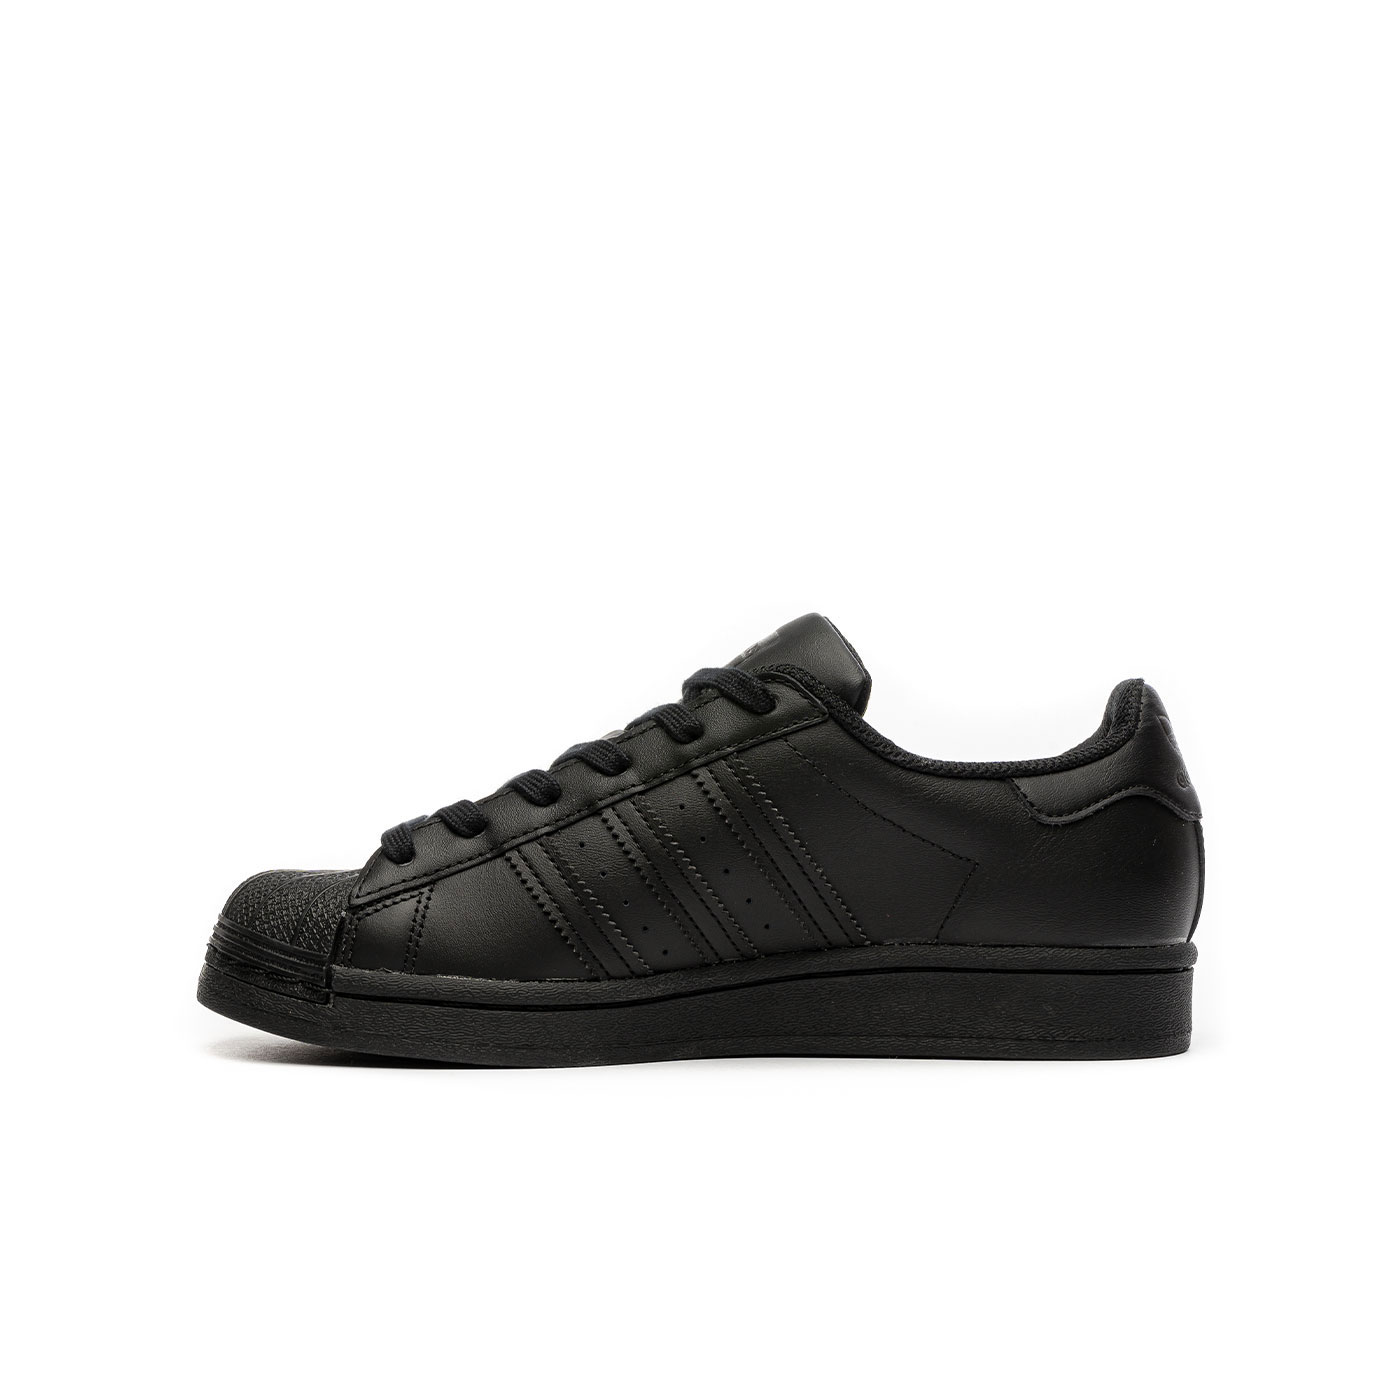 FU7713 | EllisonbronzeShops | Sneakers ADIDAS Superstar Black for | adidas wall size dimensions table adults